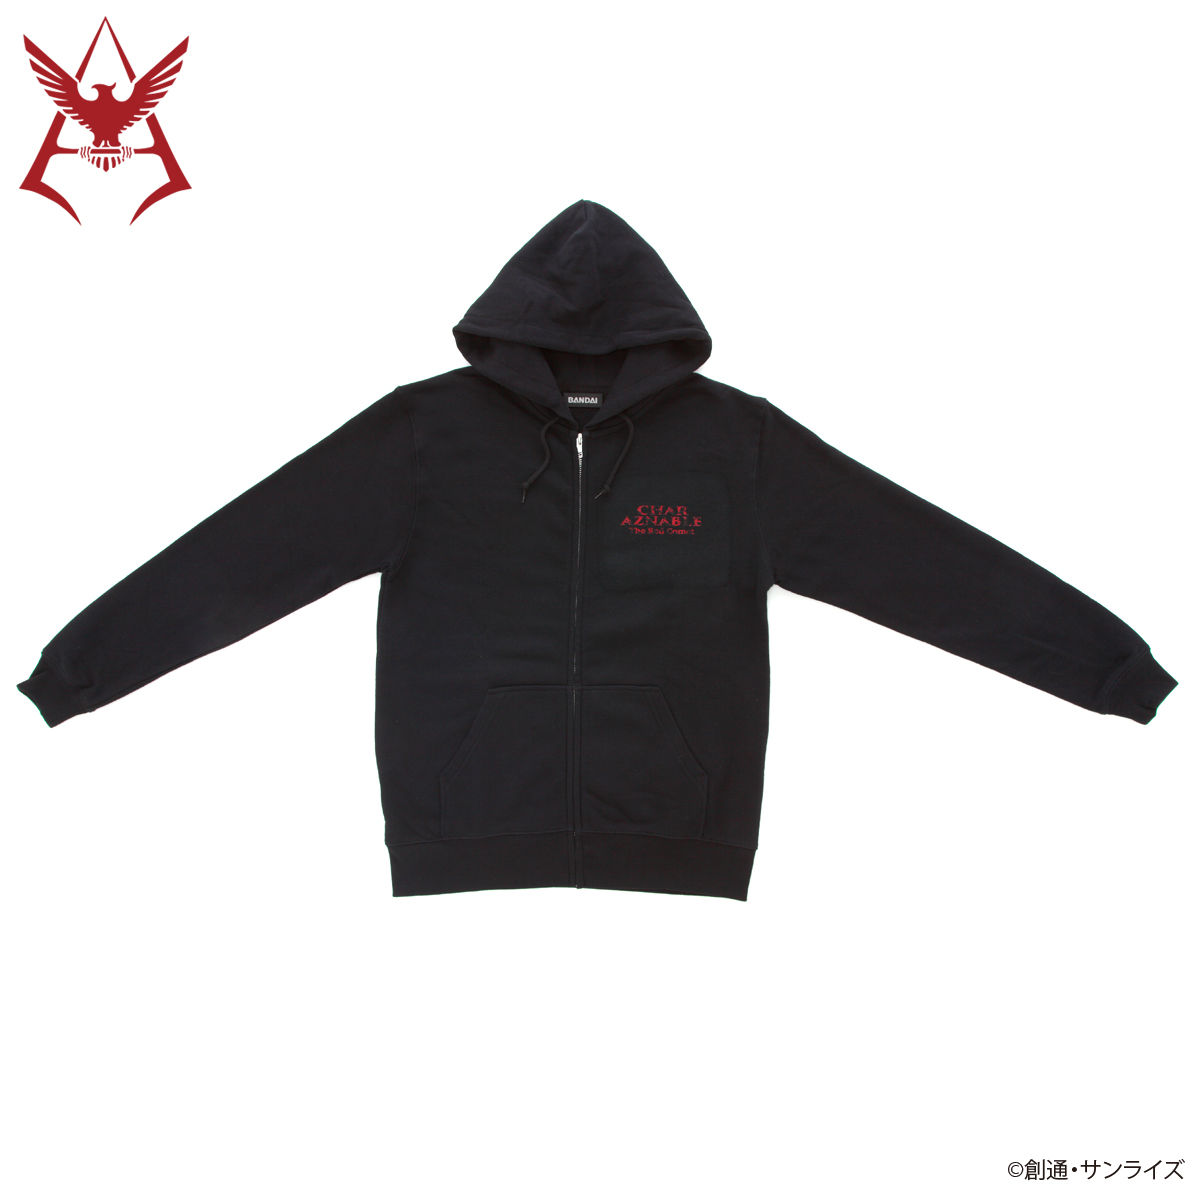 Mobile Suit Gundam Camouflage Pattern Char Aznable Emblem Hoodie [May 2021 Delivery]